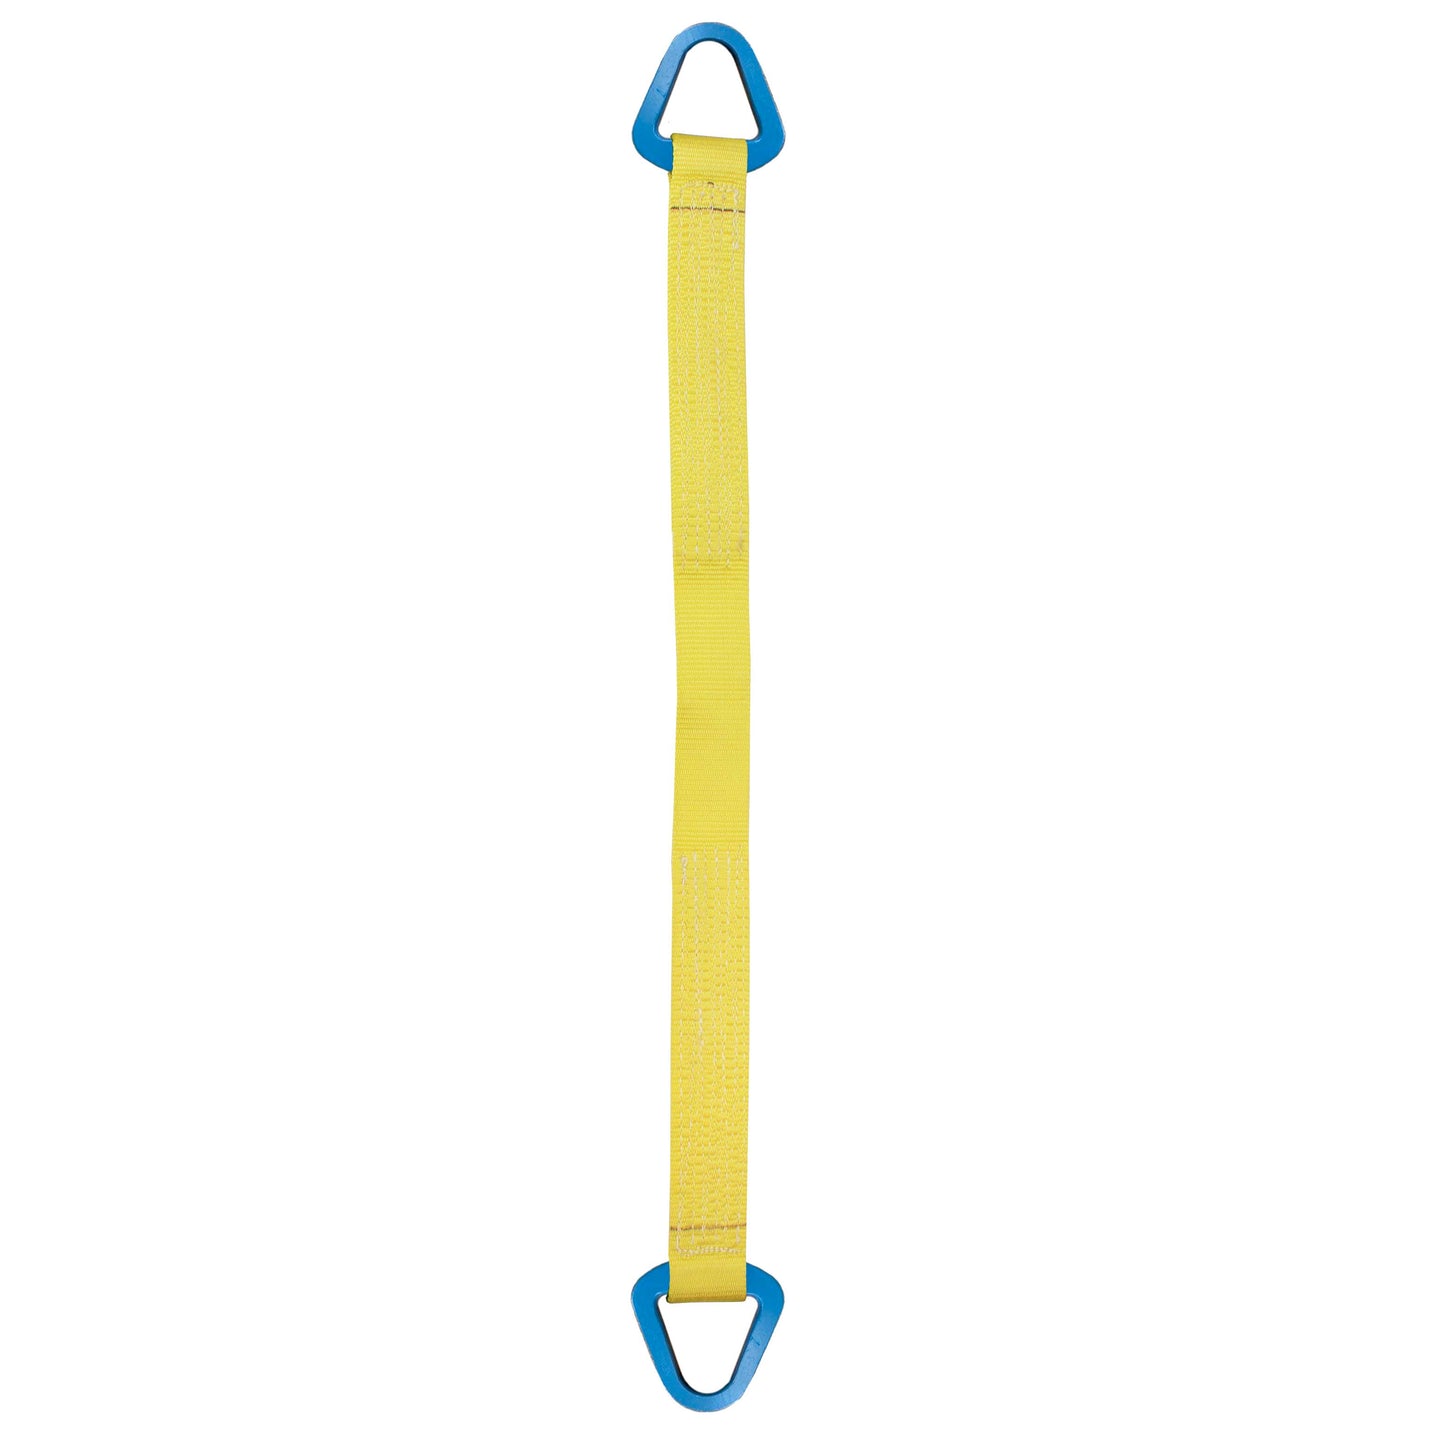 Nylon Lifting Sling Triangle 2 inch x 6 foot 2ply image 1 of 2